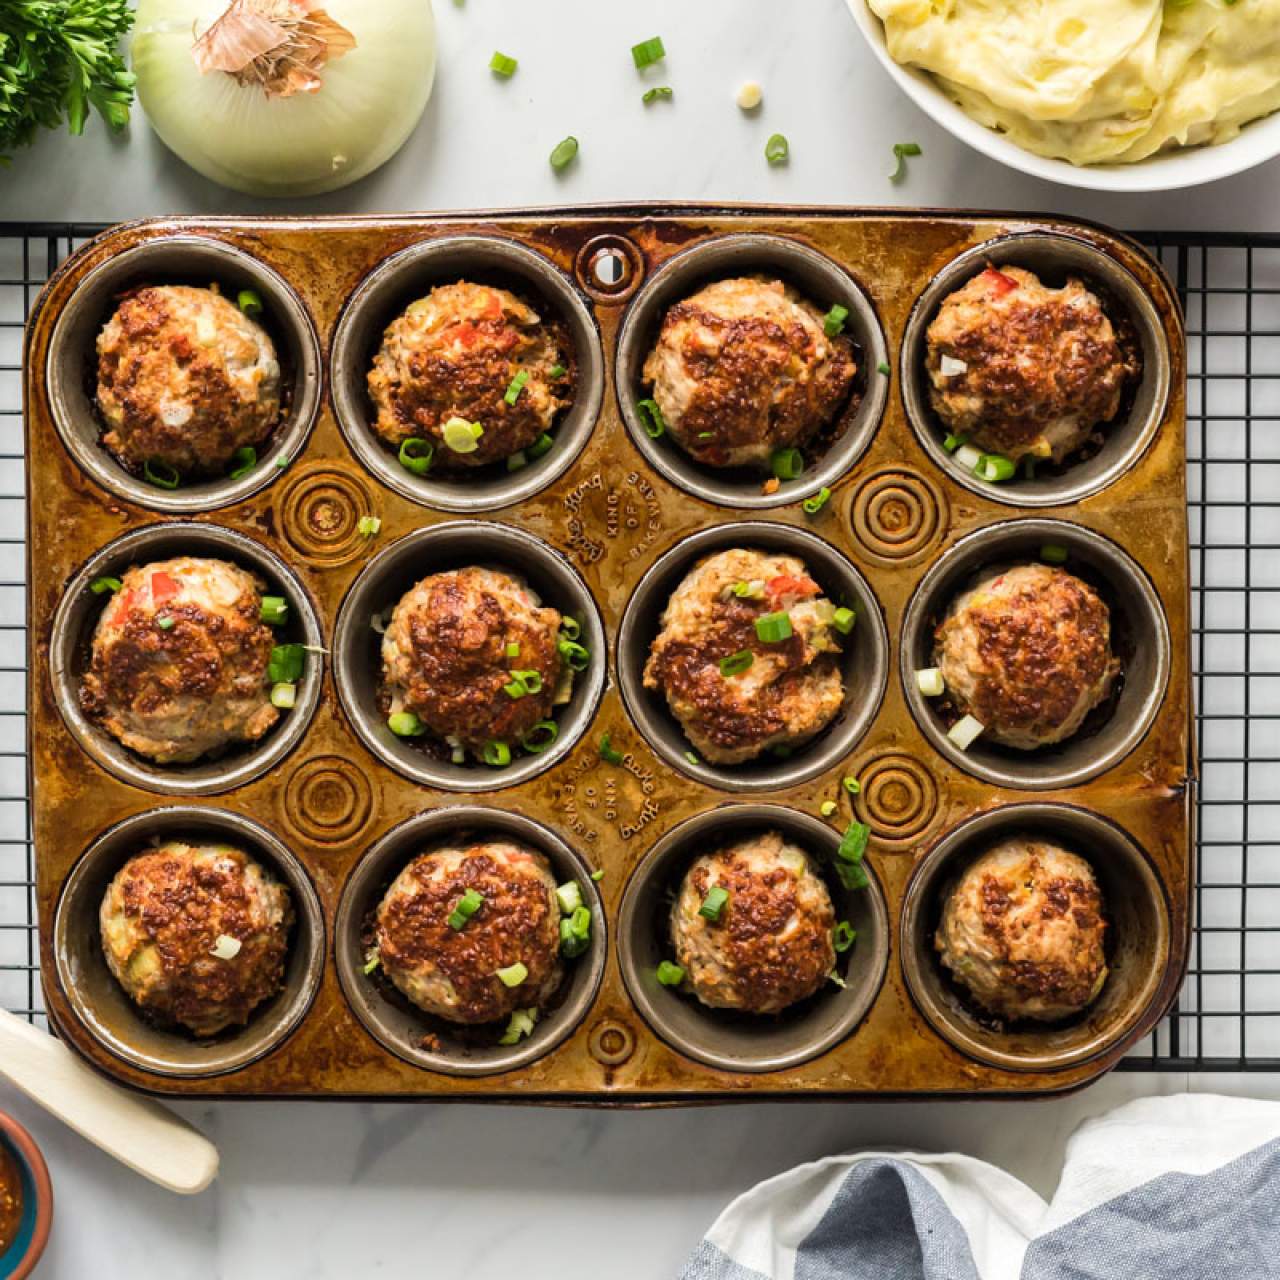 https://www.slenderkitchen.com/sites/default/files/styles/gsd-1x1/public/recipe_images/meatloaf-muffins.jpg